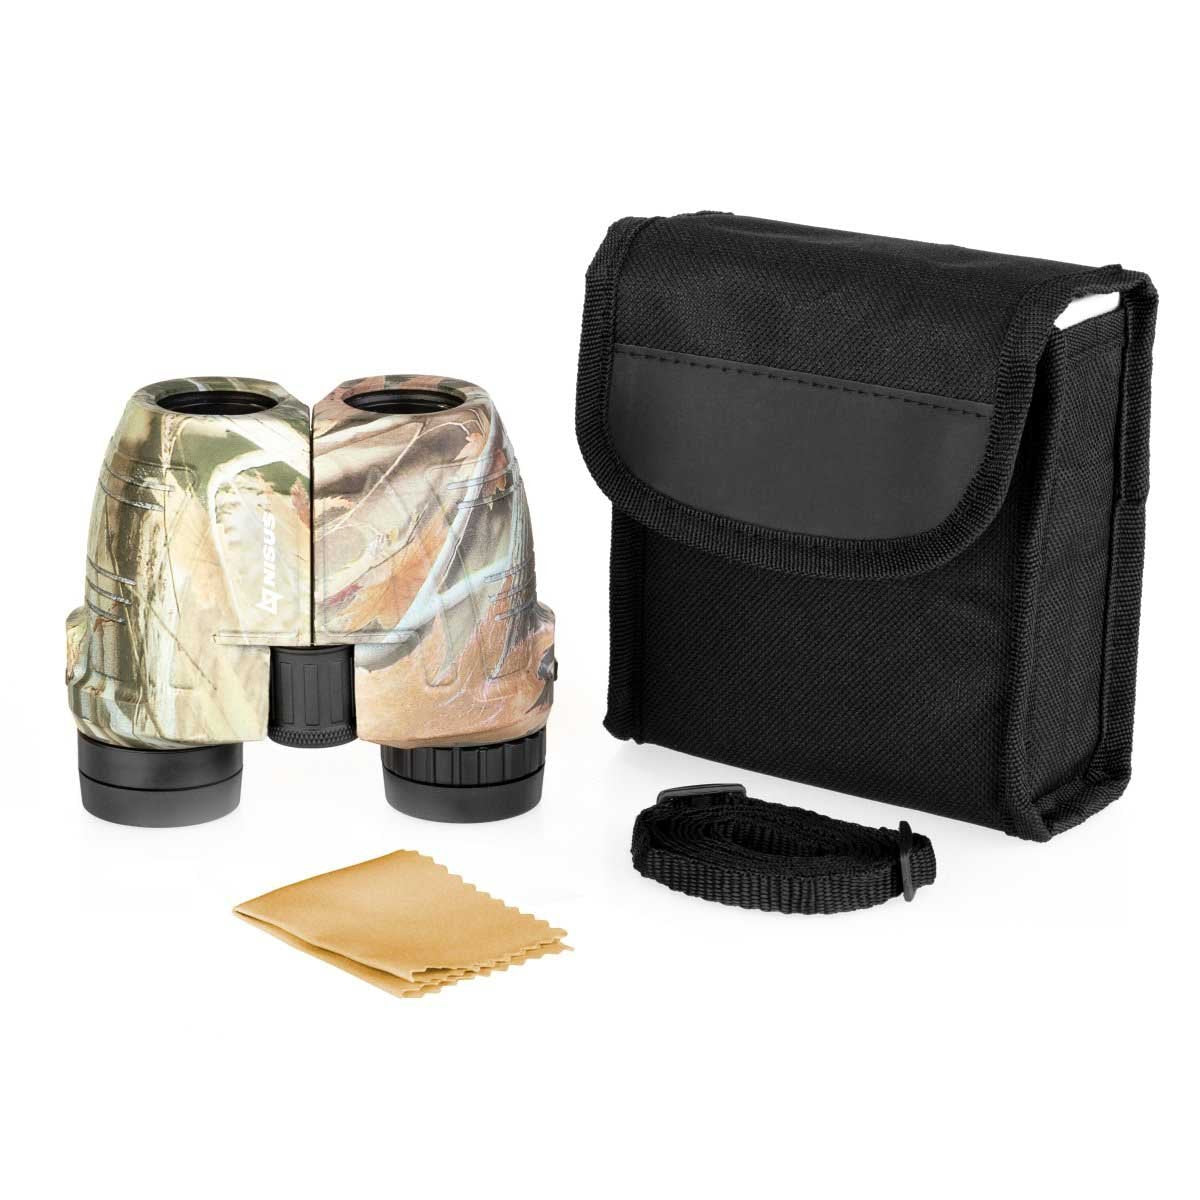 12x25 Large Hunting Compact Camo Binocular with a storage case